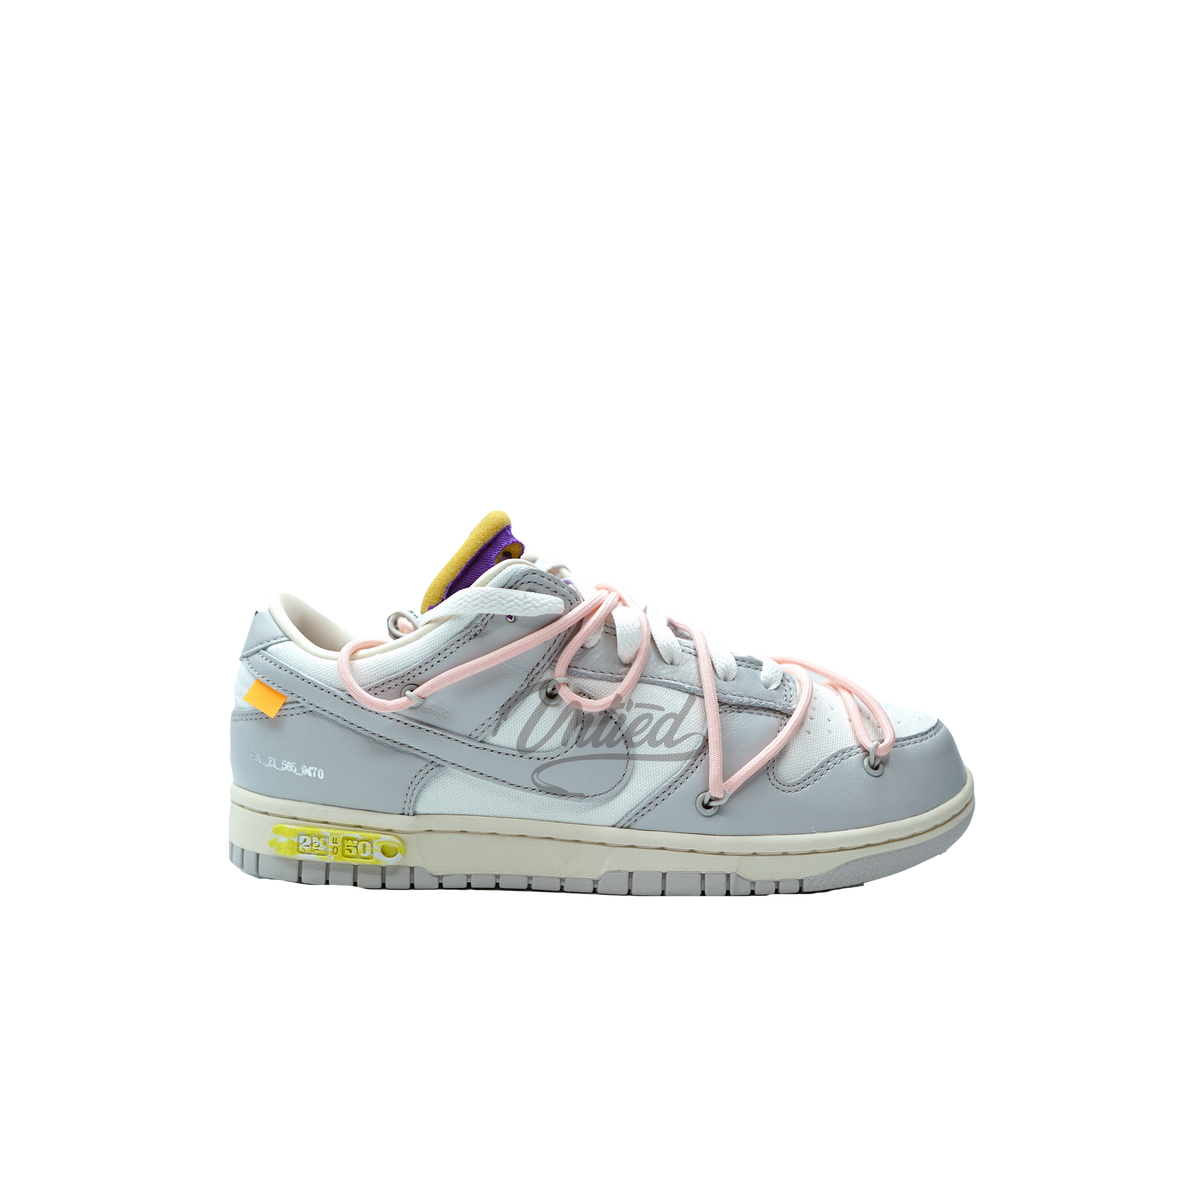 Off-White Nike Dunk Low "Lot 24"